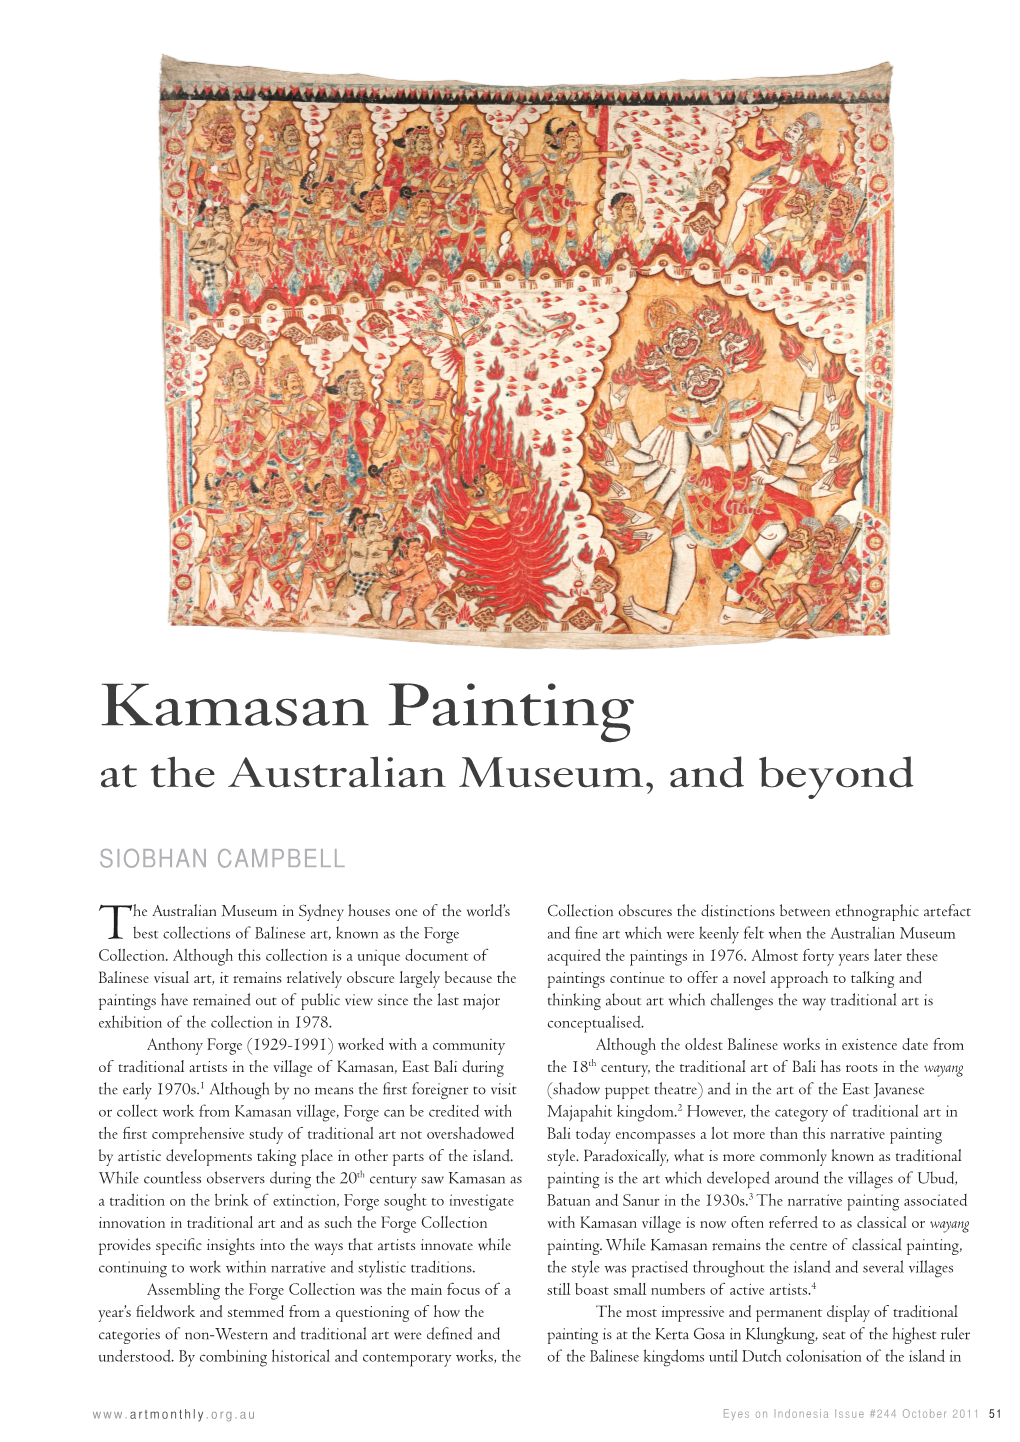 Kamasan Painting at the Australian Museum, and Beyond